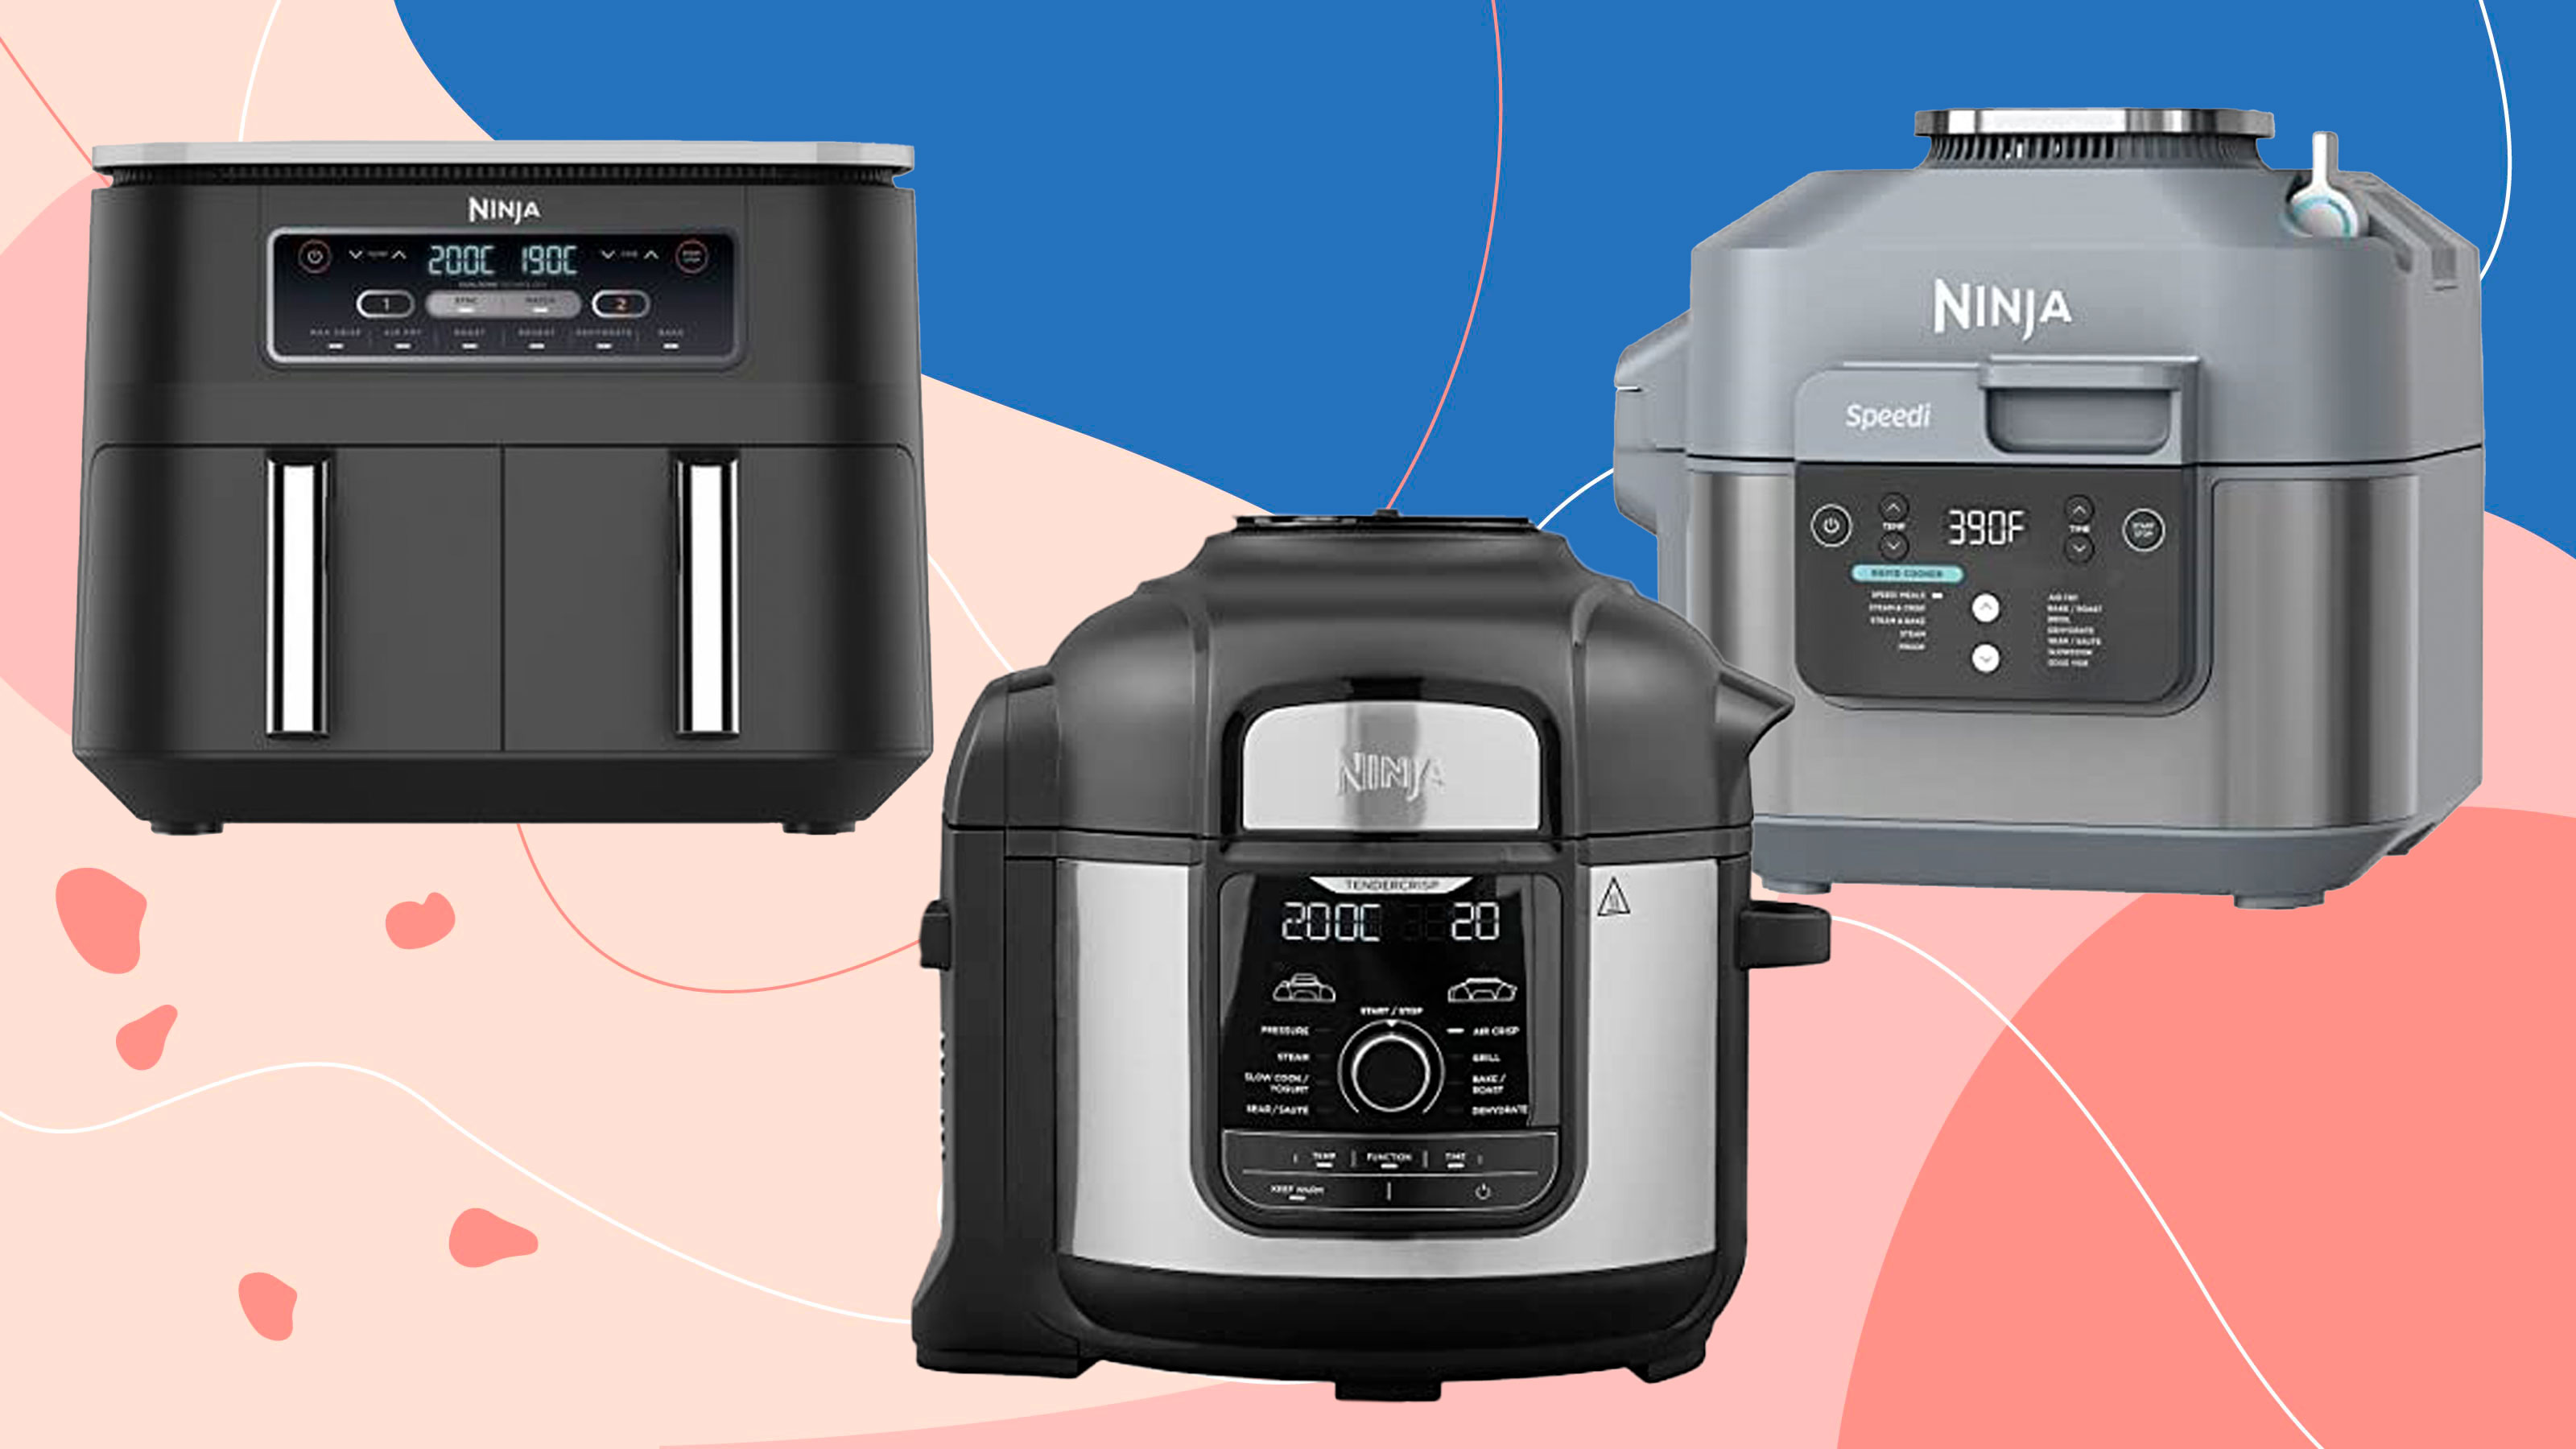 Ninja Appliances Review: The 7 Countertop Gadgets you Need from Ninja – SPY